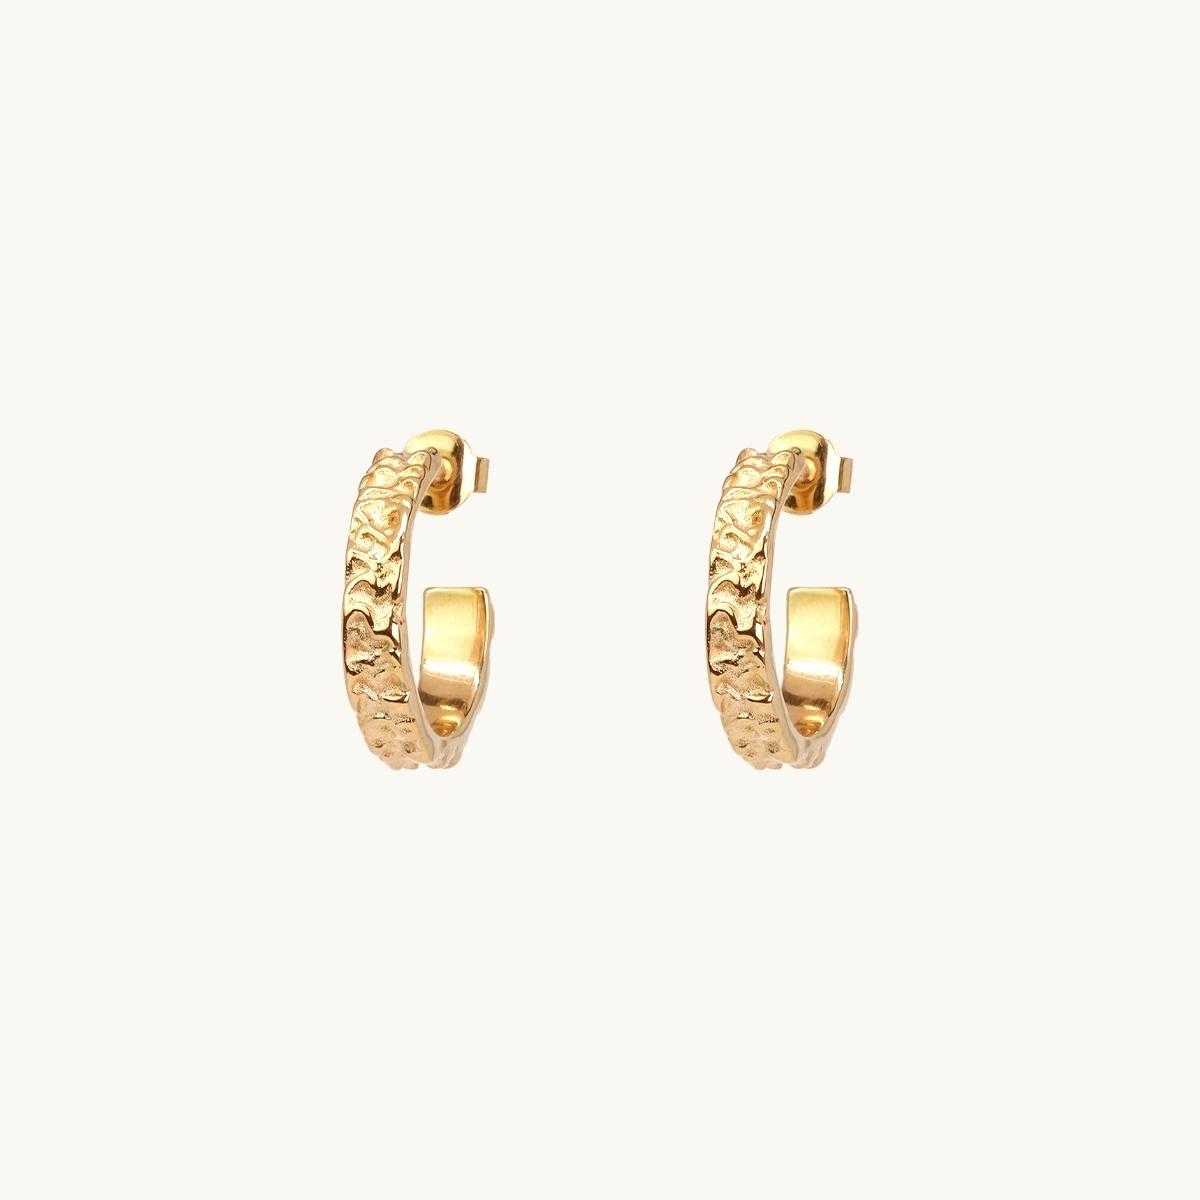 Hoops, princess, patterned,18K gold plated brass